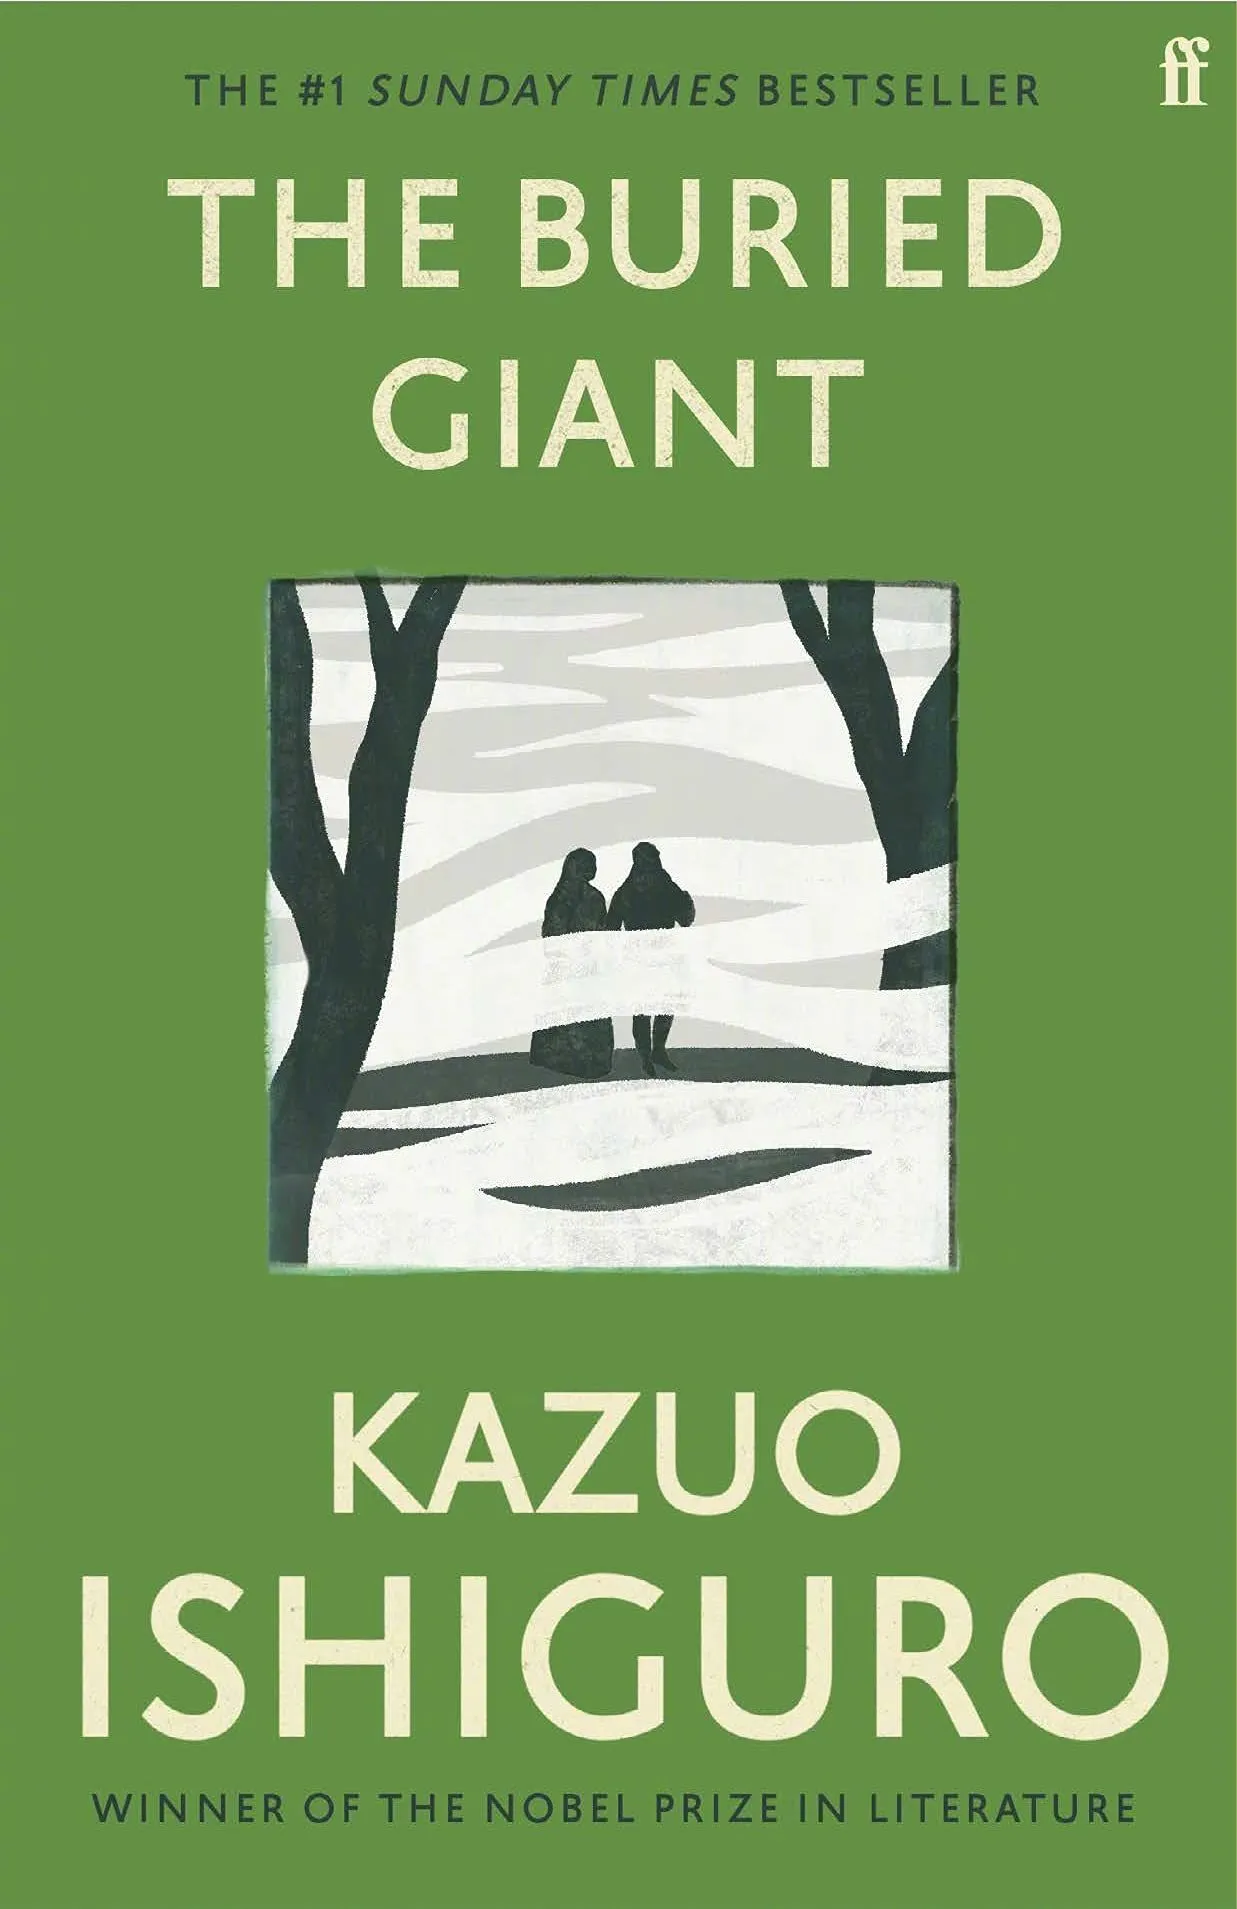 'The Buried Giant': Guillermo del Toro to Make Kazuo Ishiguro's Novel a Stop-Motion Animation | FMV6